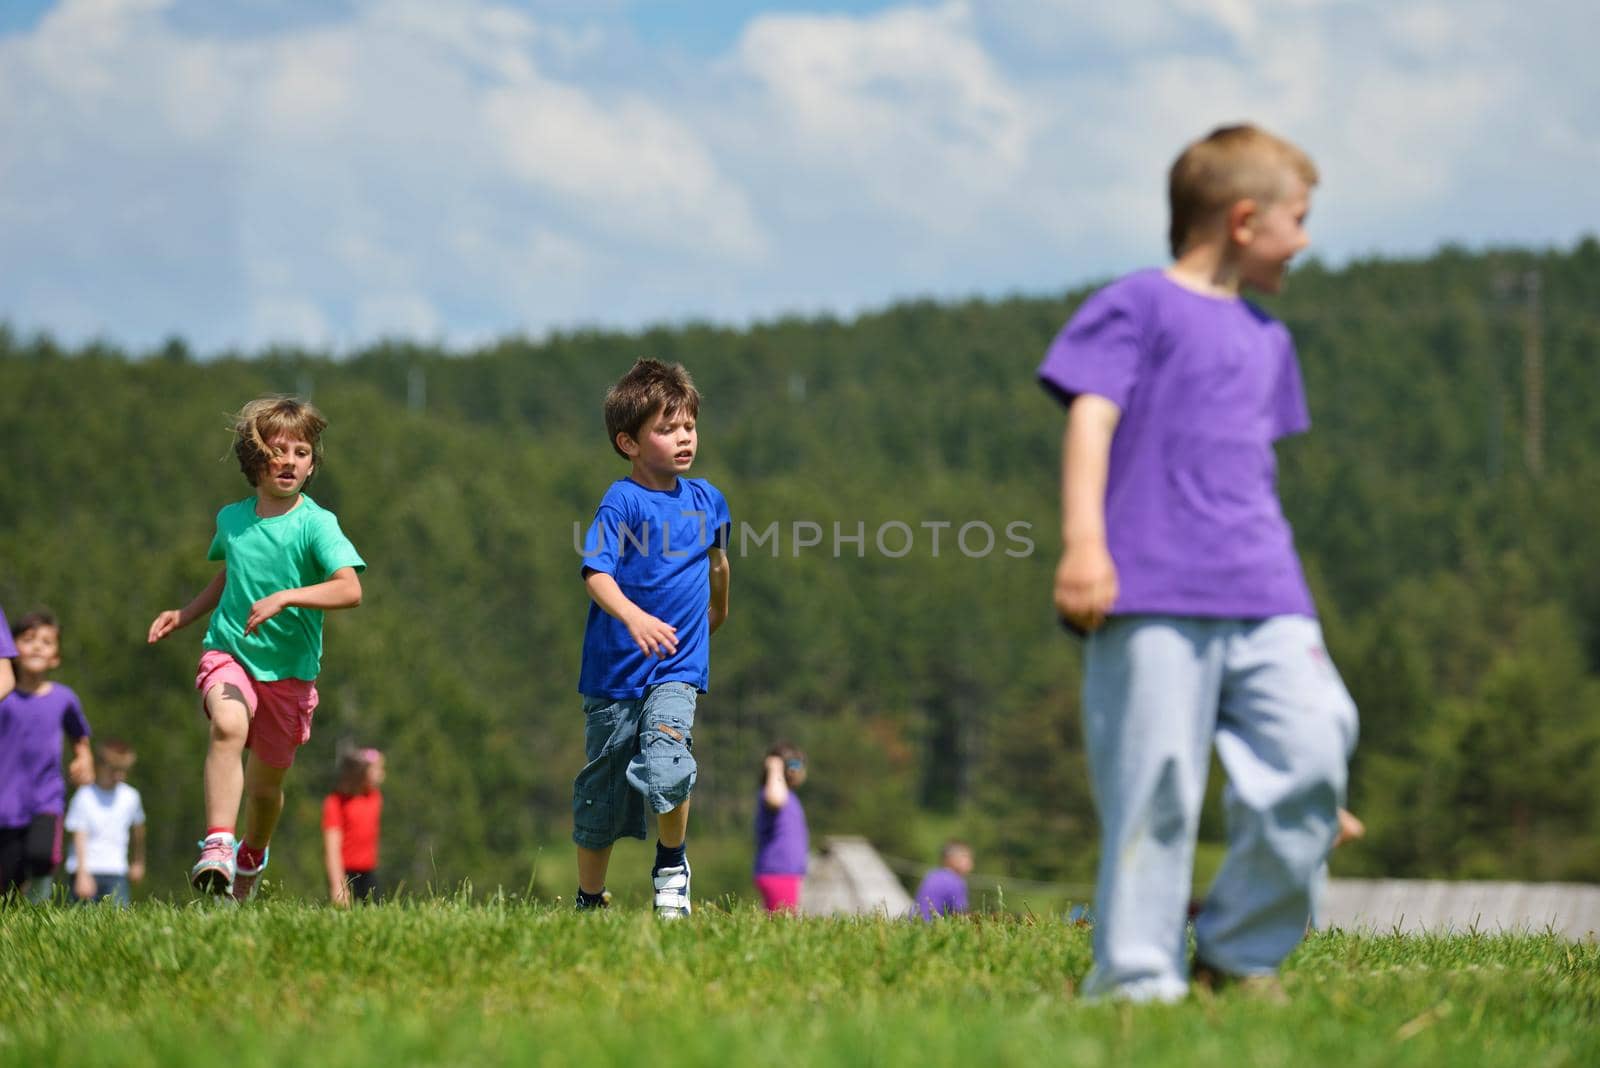 happy kids group  have fun in nature by dotshock